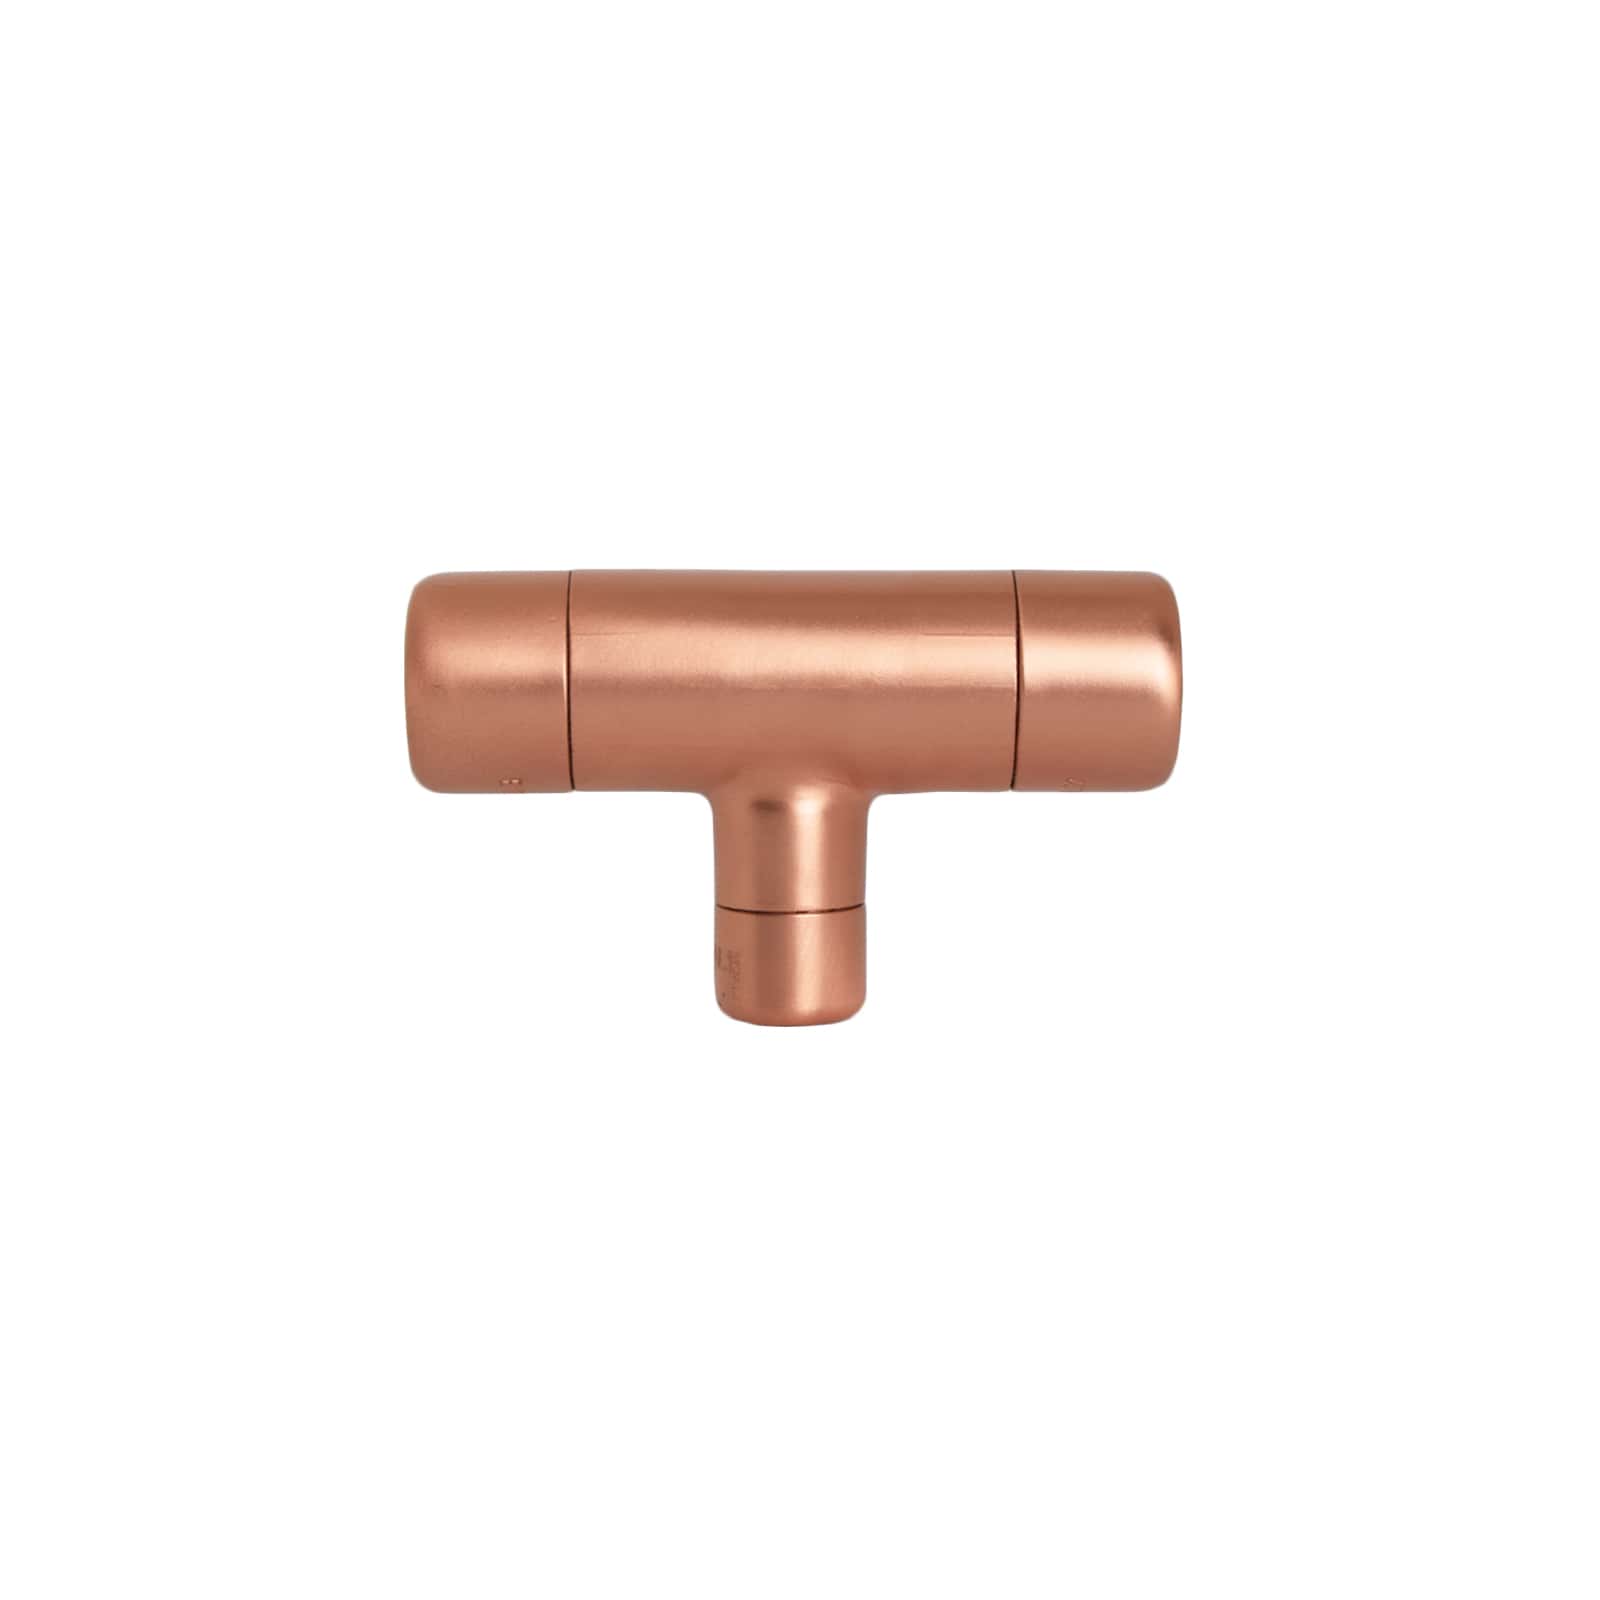 Copper Knob T-shaped Thick-Bodied - On White Background